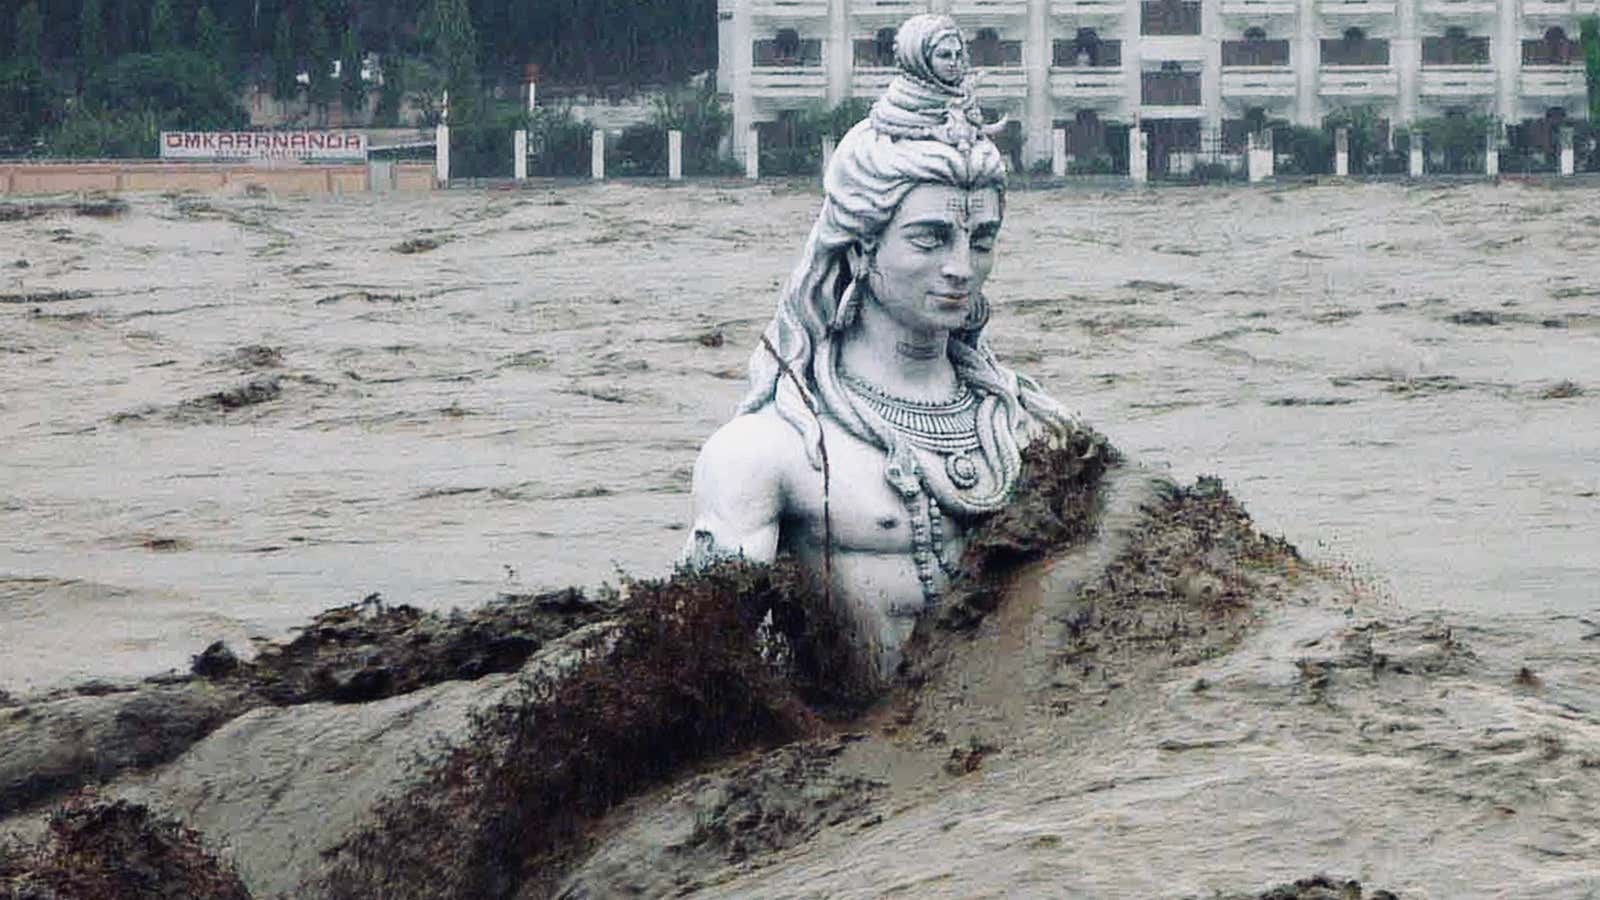 A submerged statue of the Hindu Lord Shiva stands amid the flooded waters of river Ganges.